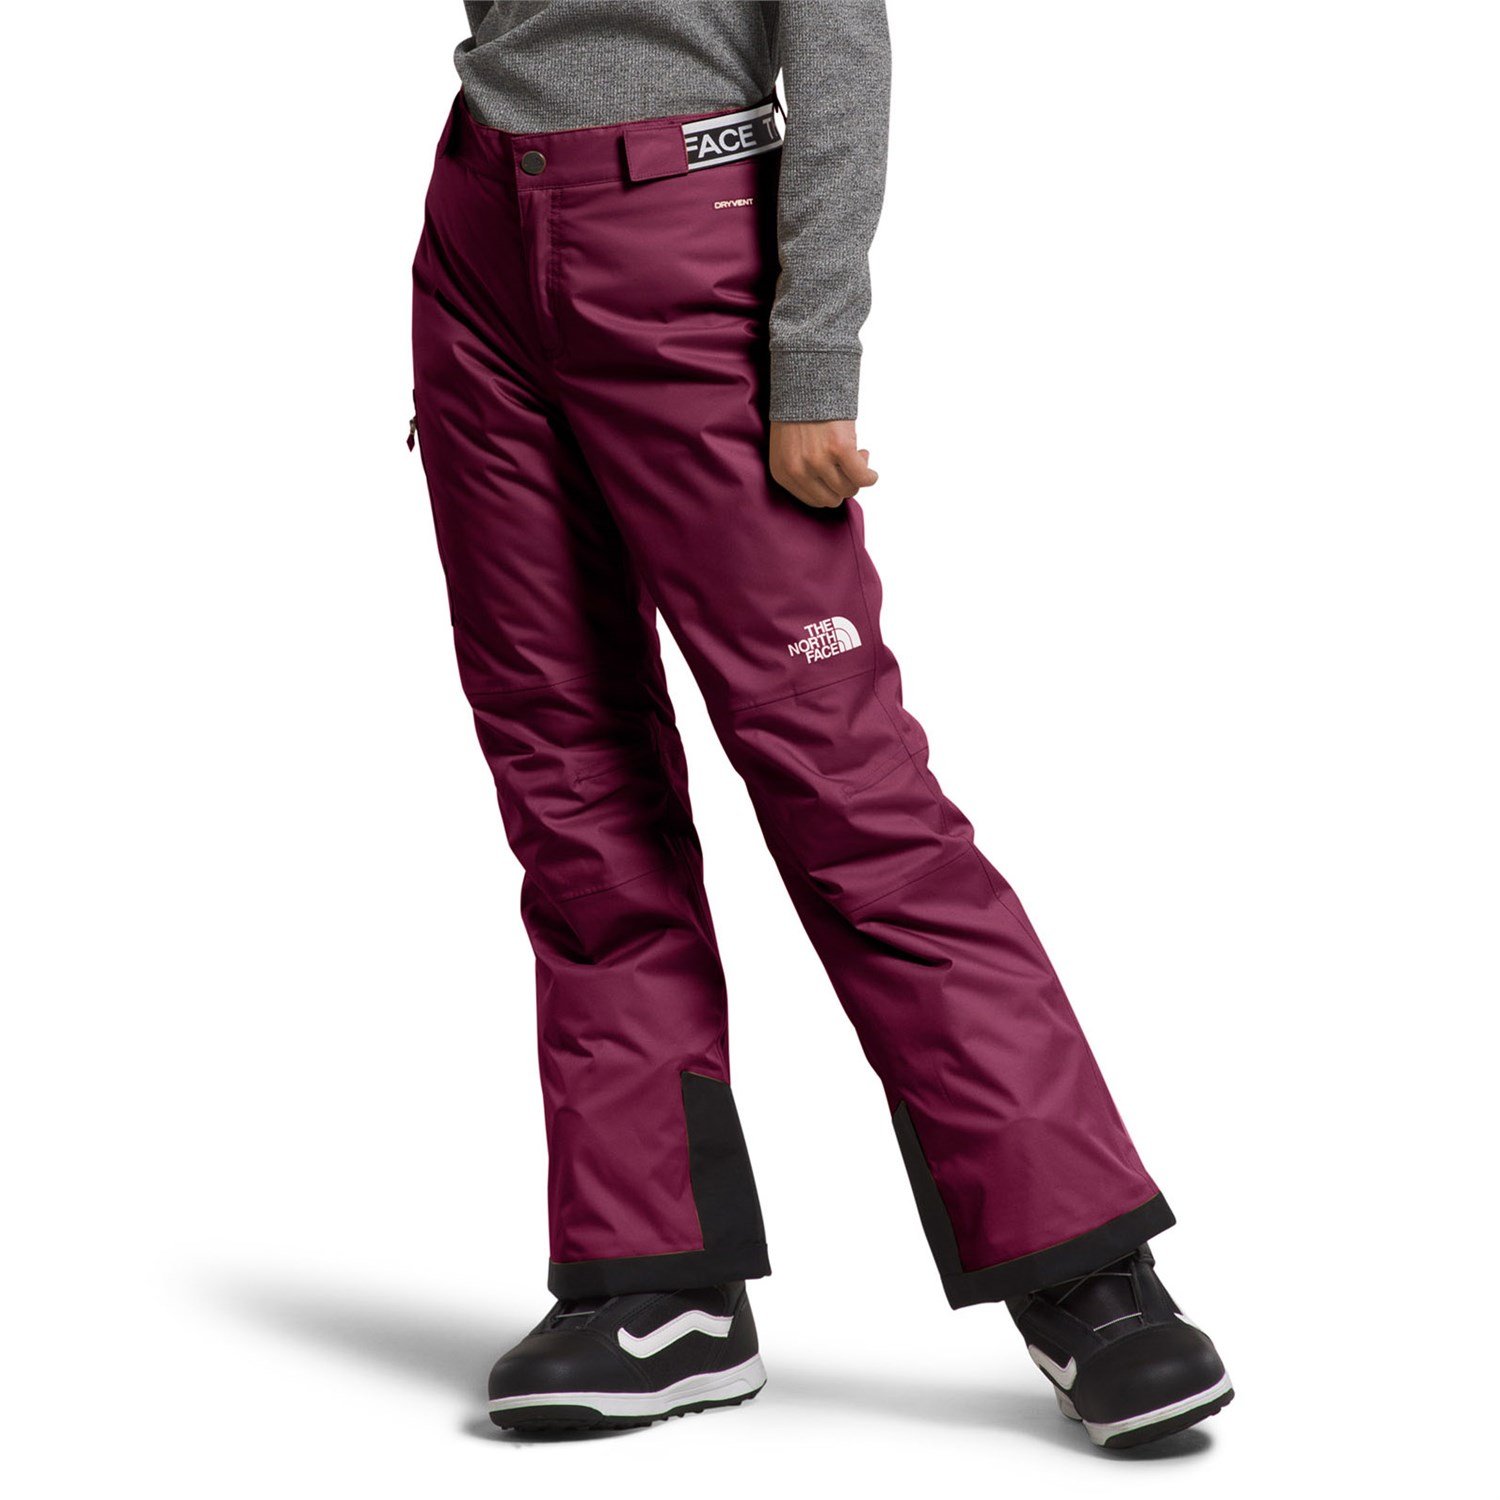 Брюки The North Face Freedom Insulated, цвет Boysenberry брюки the north face freedom insulated plus цвет boysenberry